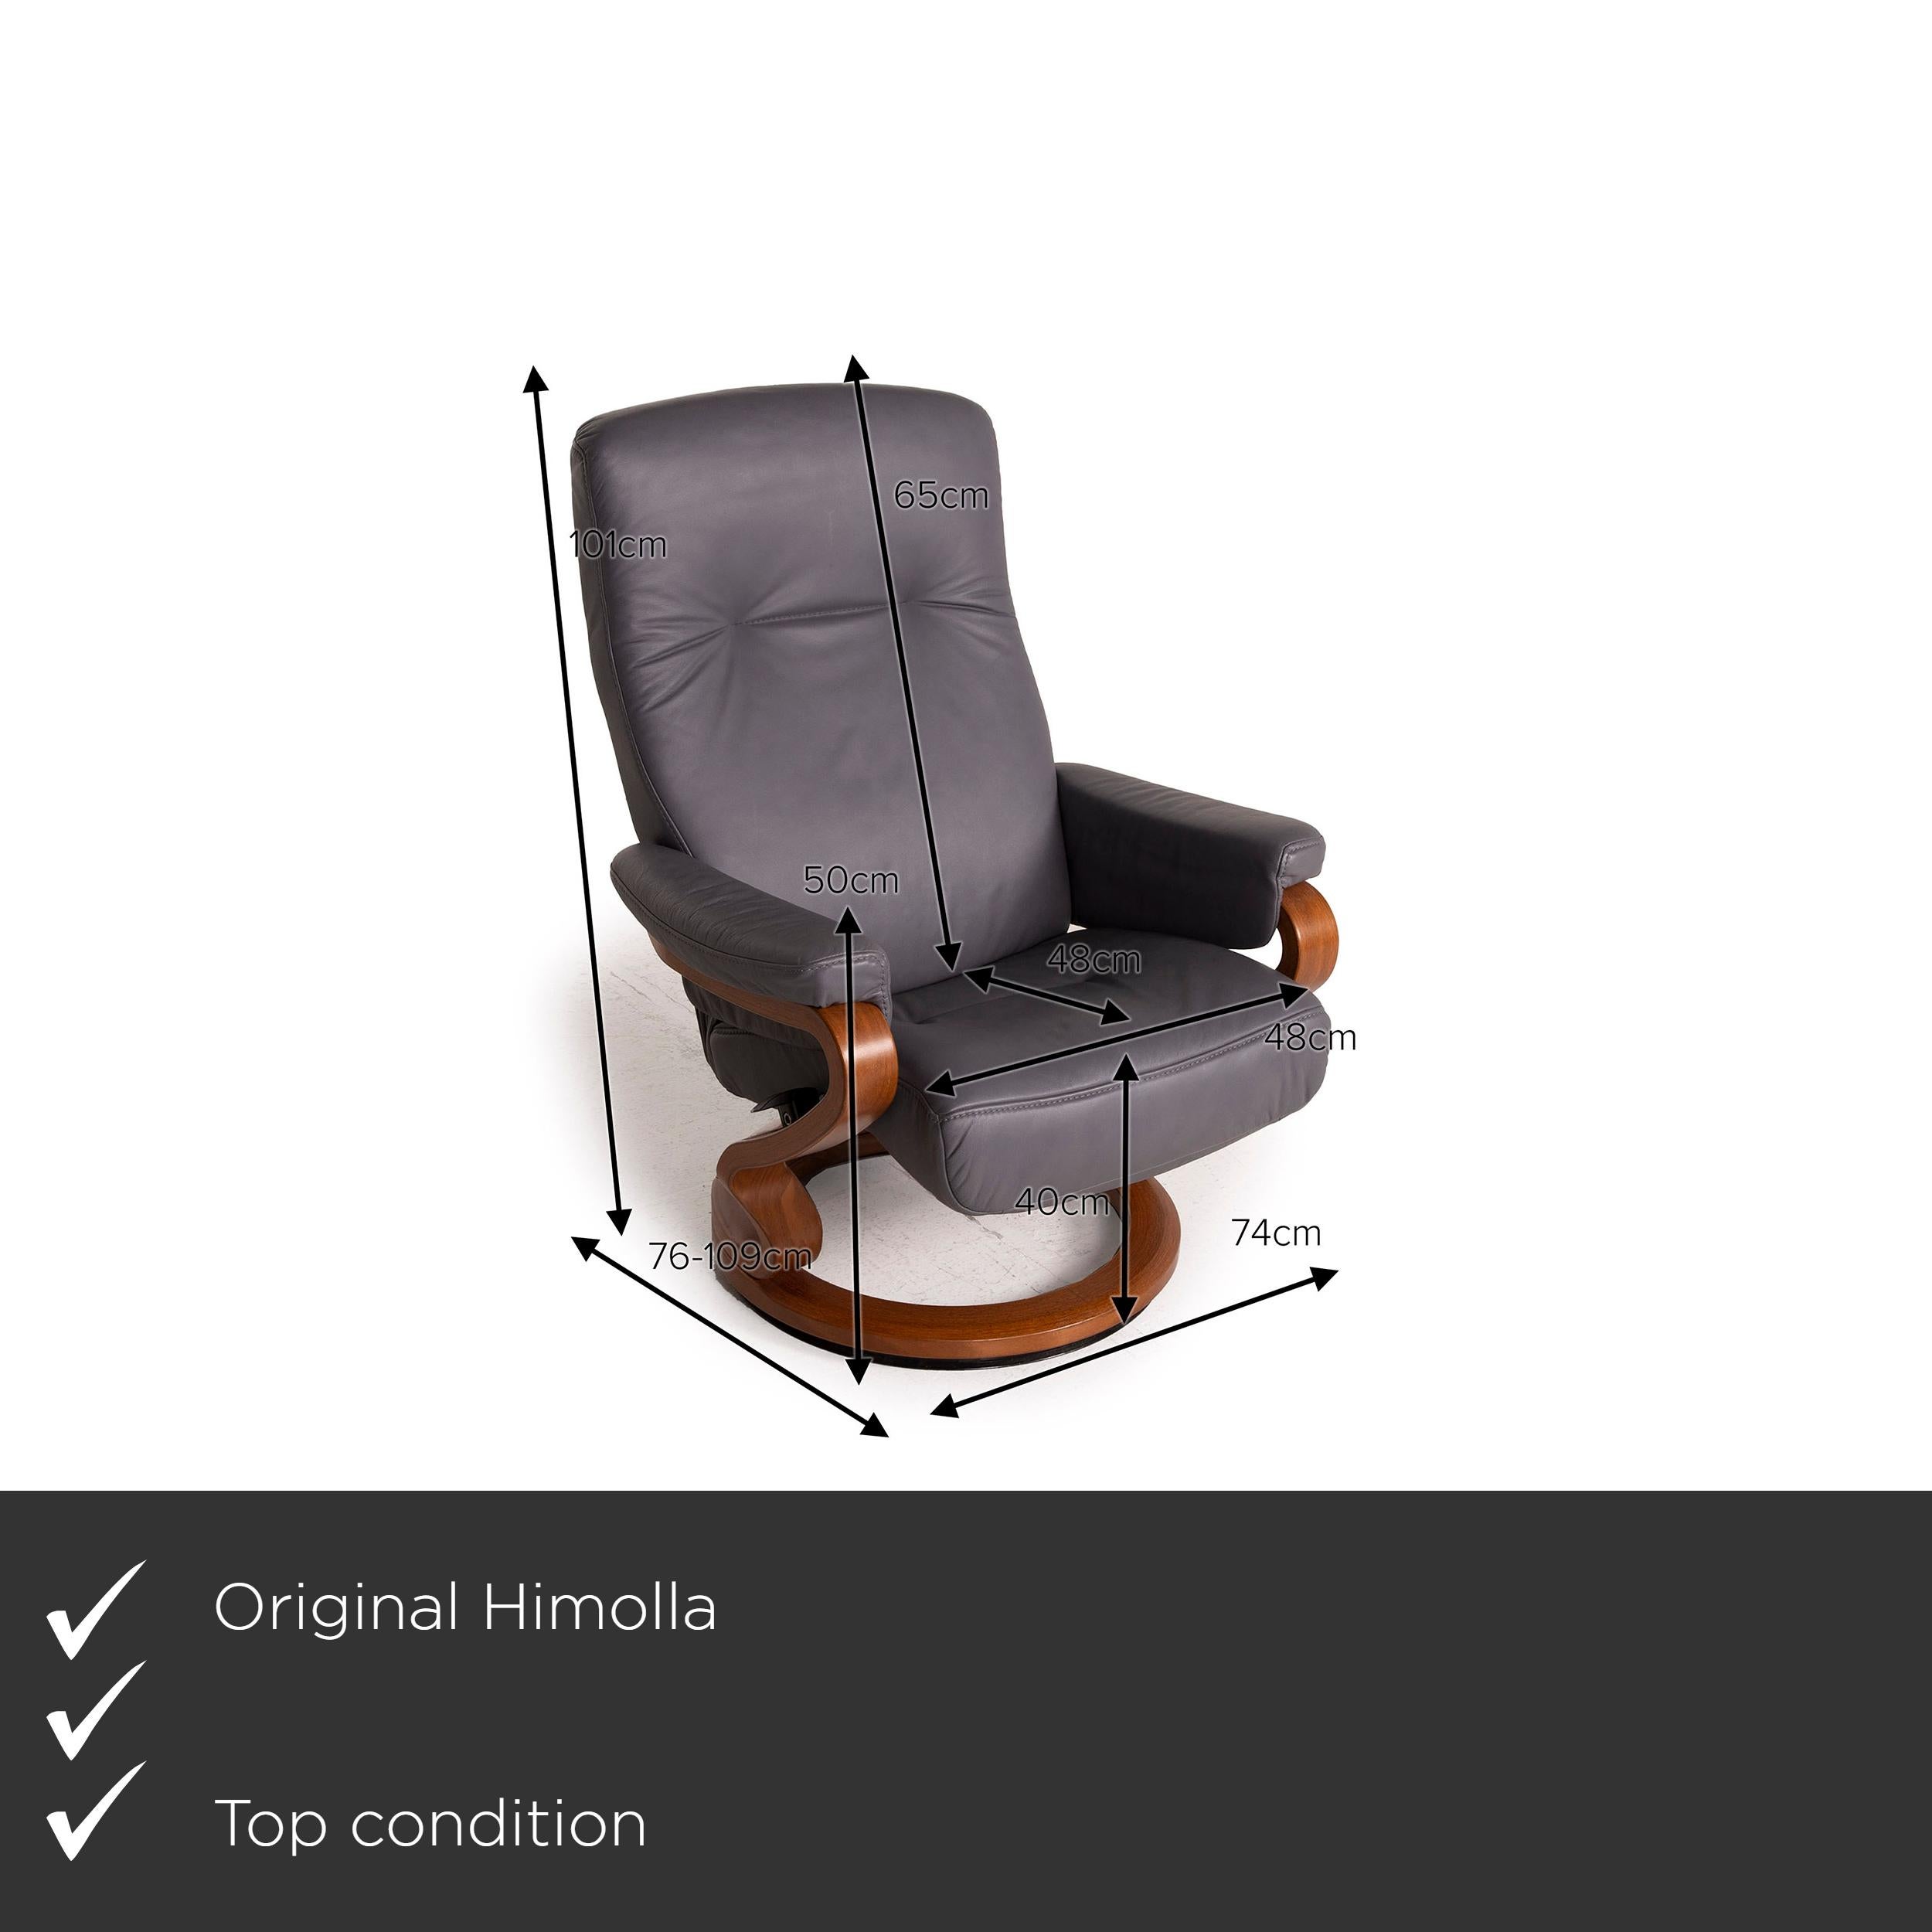 We present to you a Himolla leather armchair gray relax function.


 Product measurements in centimeters:
 

Depth: 76
Width: 74
Height: 101
Seat height: 40
Rest height: 55
Seat depth: 48
Seat width: 48
Back height: 65.
  